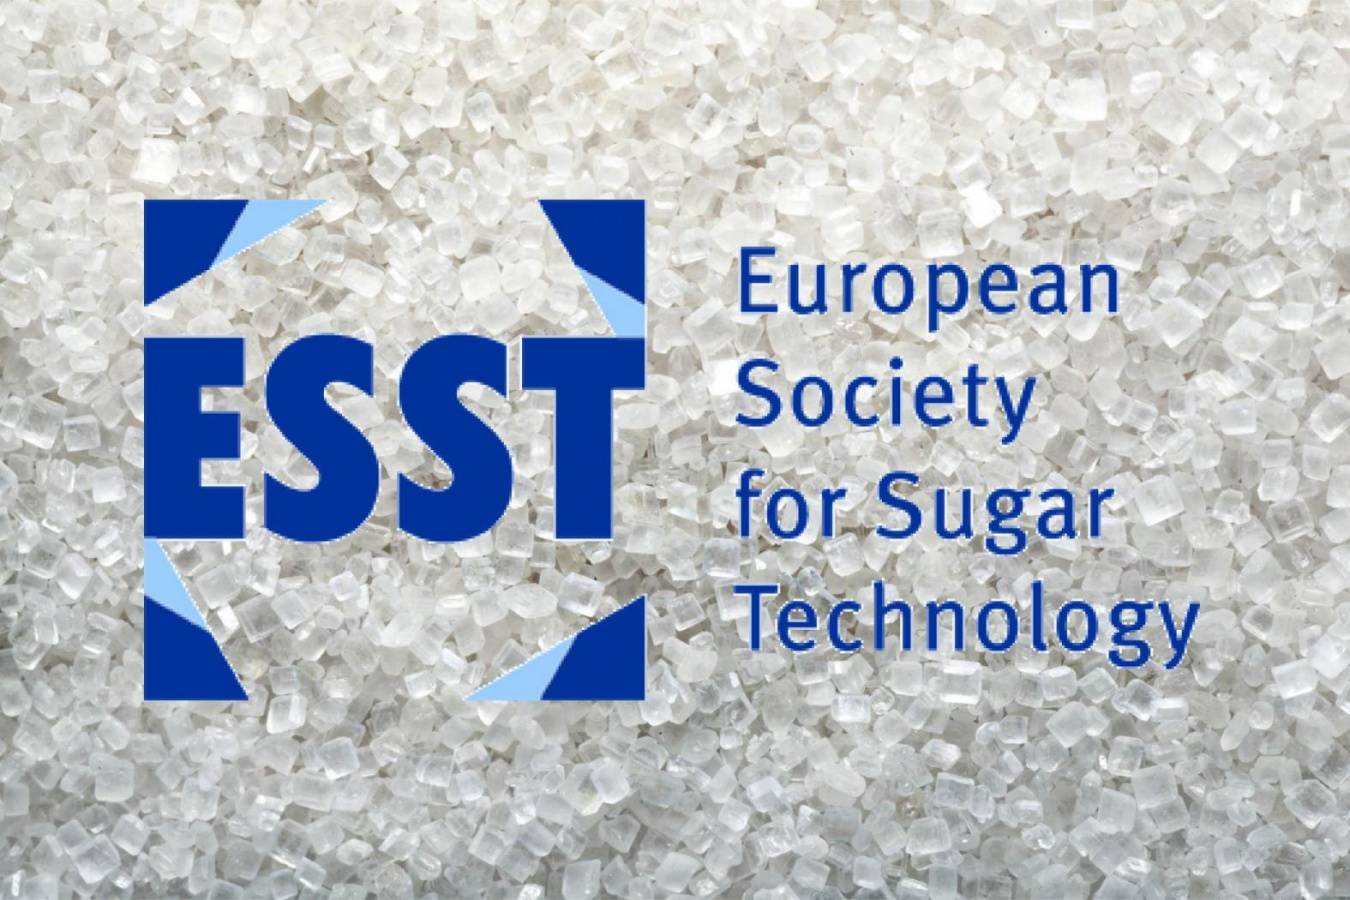 Expert knowledge on sugar sifting at the ESST Congress 2019 RHEWUM GmbH at the ESST Congress 2019 from 26 - 29 May 2019 in Poznan, Poland